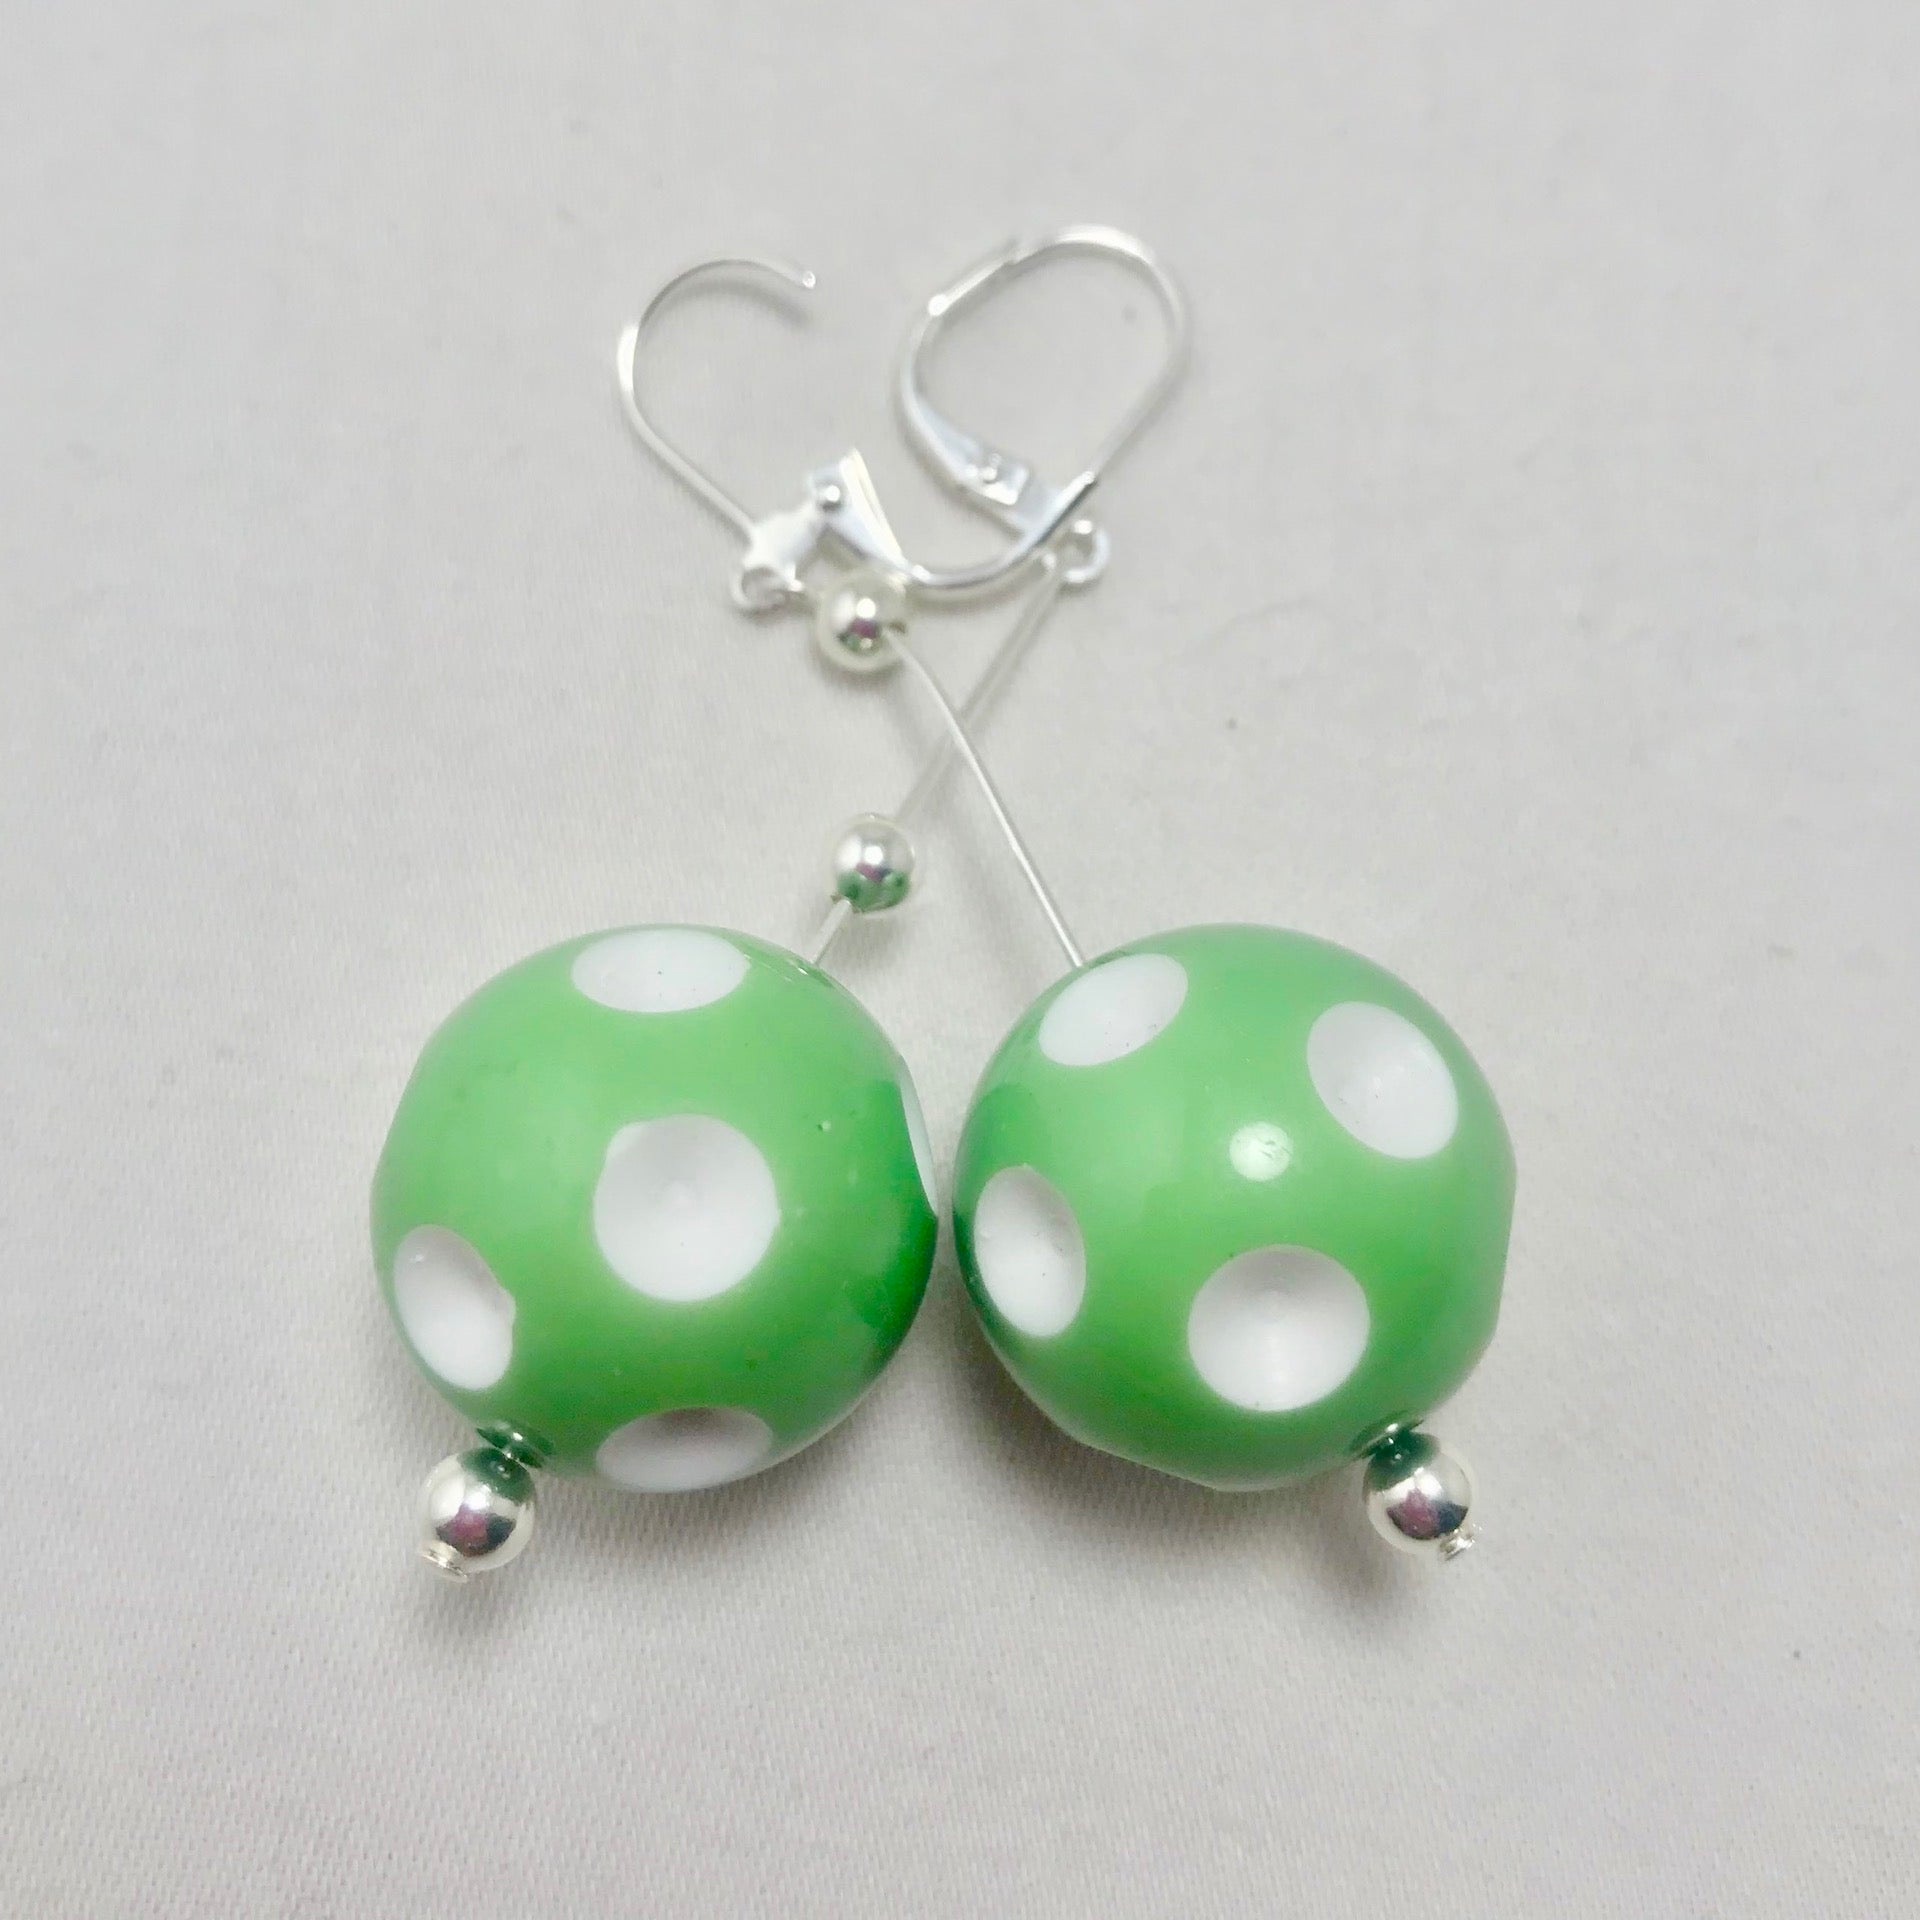 Mini Pickleball Dangling Earrings - Eight Colors to Choose From  Super cute pickleball beads made into dangle earrings. They hang approximately an 2 and a half inches down. The beads are approximately 1/2 an inch in width.  Show your love for pickleball wherever you go with these super sweet earrings. Colors to match any outfit!! 